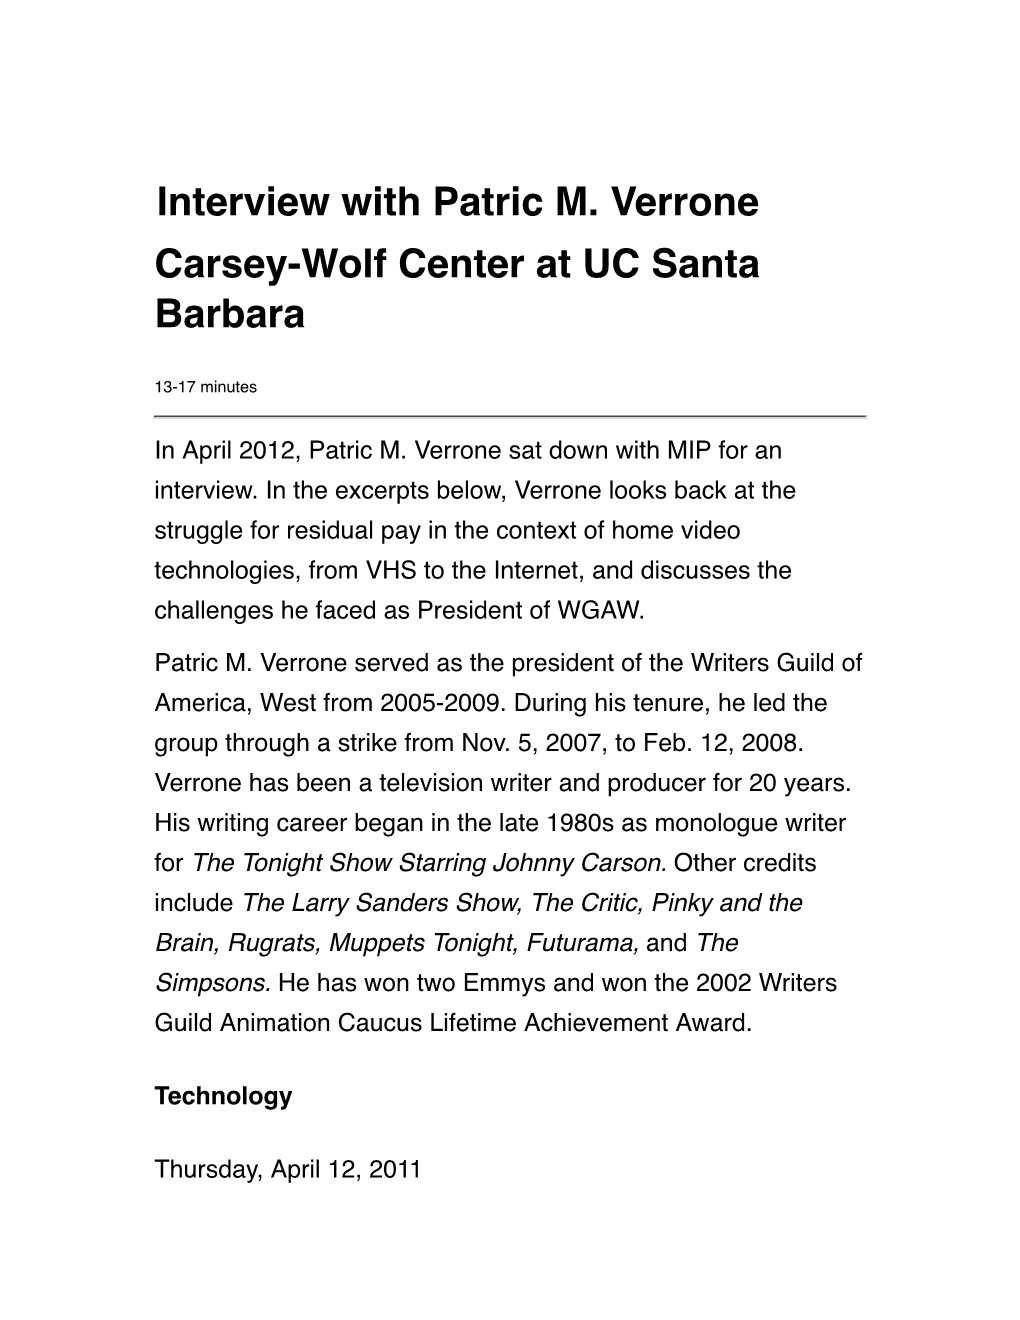 Patric Verrone in Distribution Revolution: Conversations About the Digital Future of Film and Television